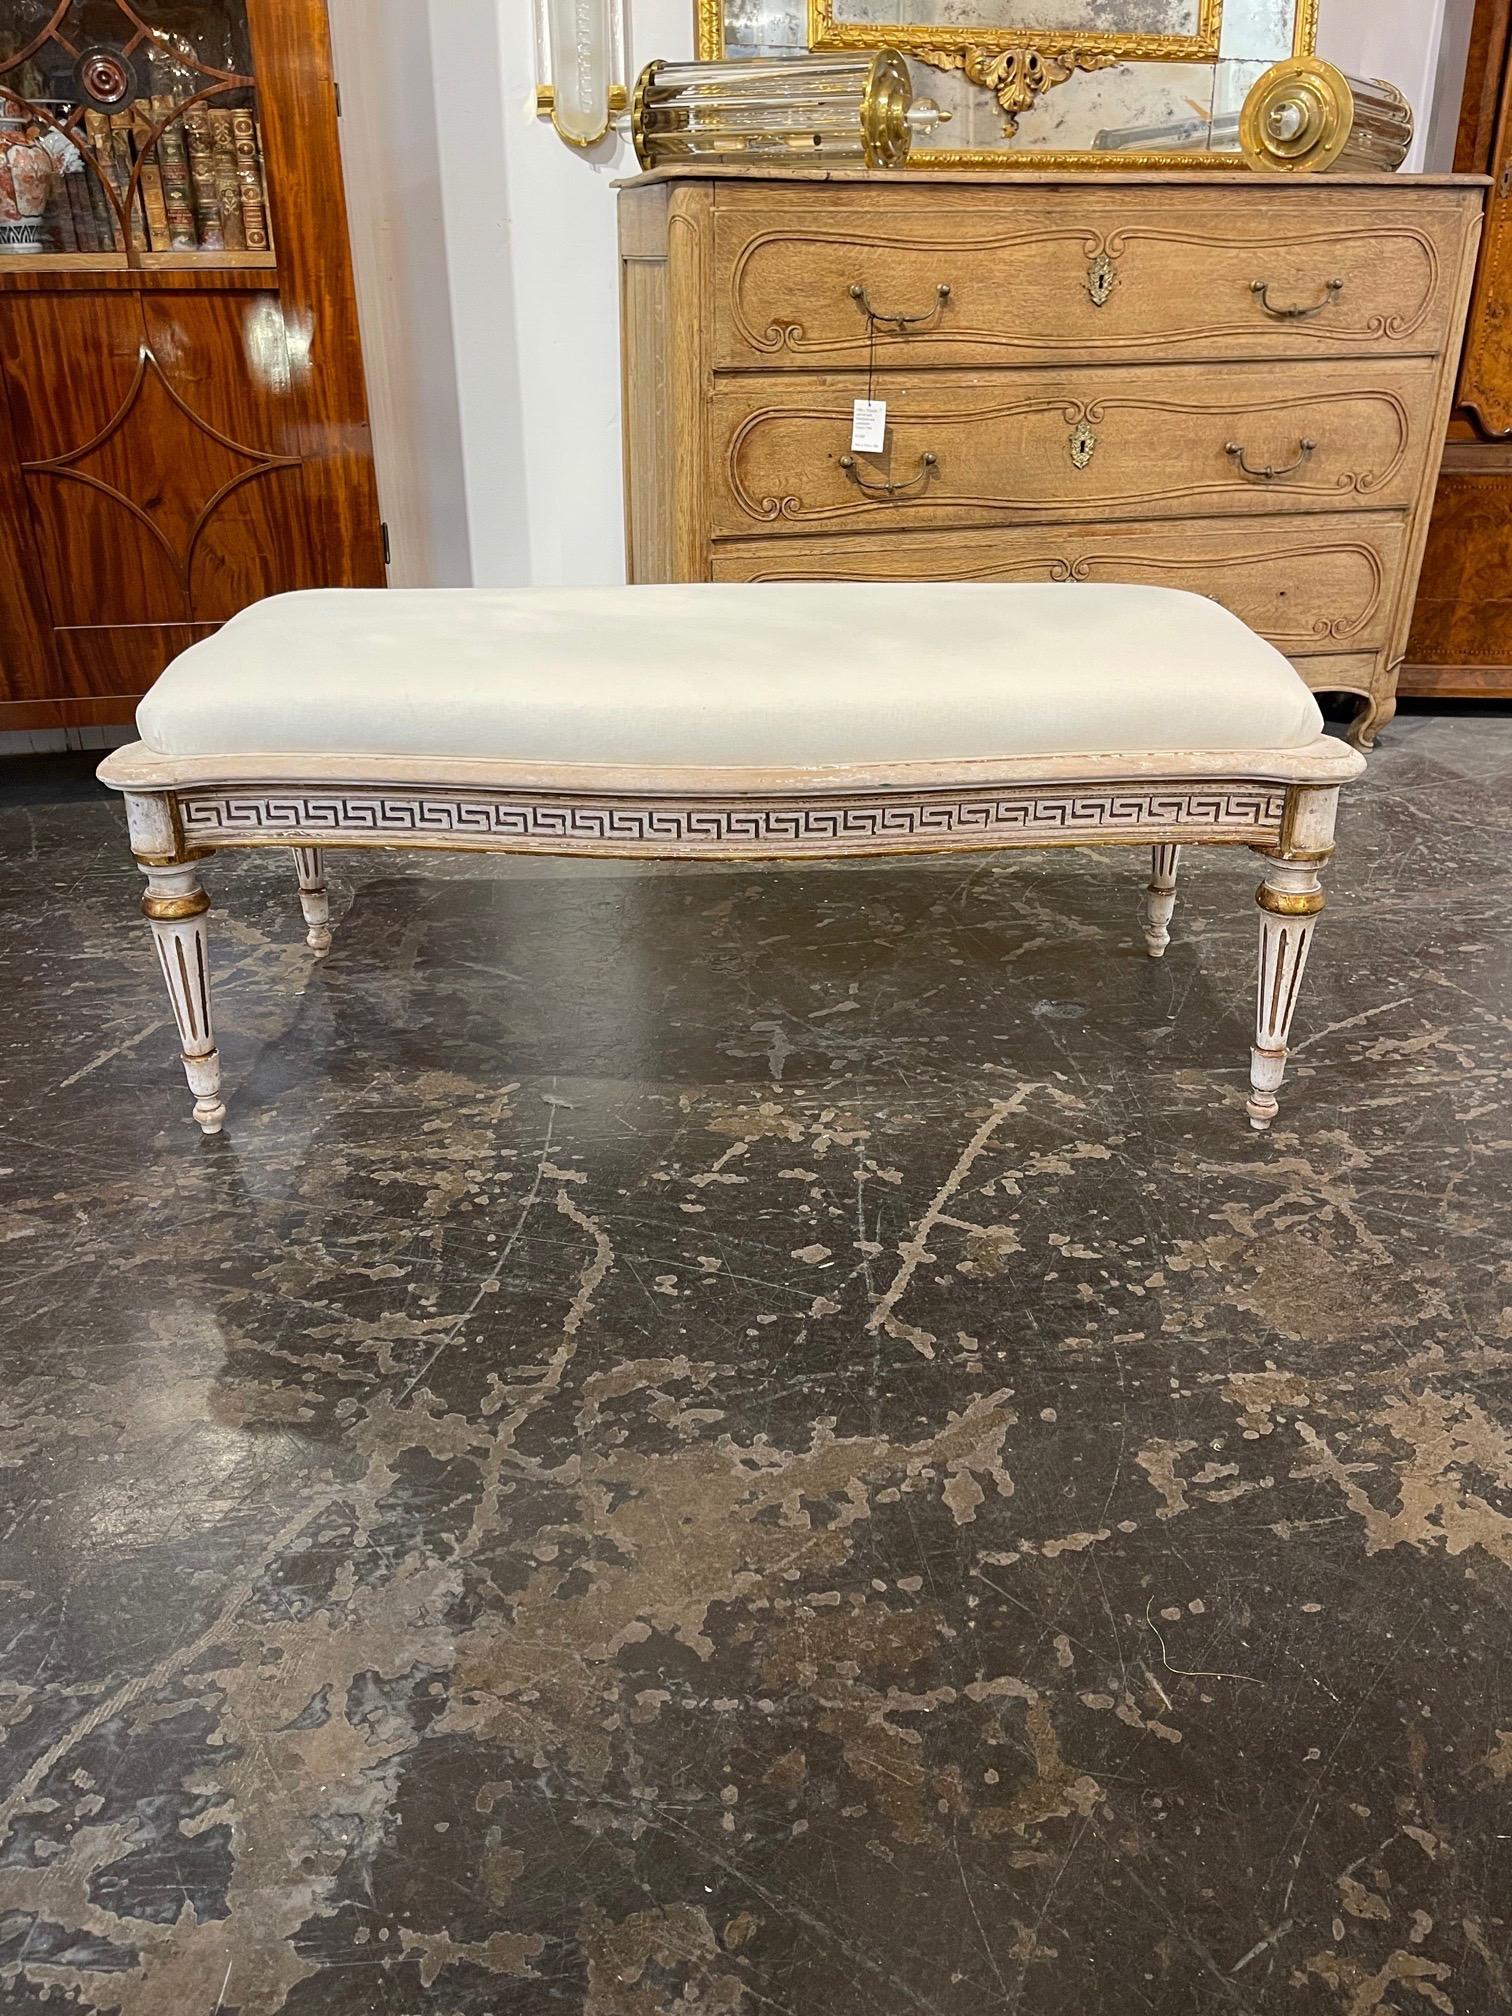 Gorgeous mid century Italian carved and painted bench with Greek key pattern. Very nice carvings and pretty creme colored upholstery. A classic piece!